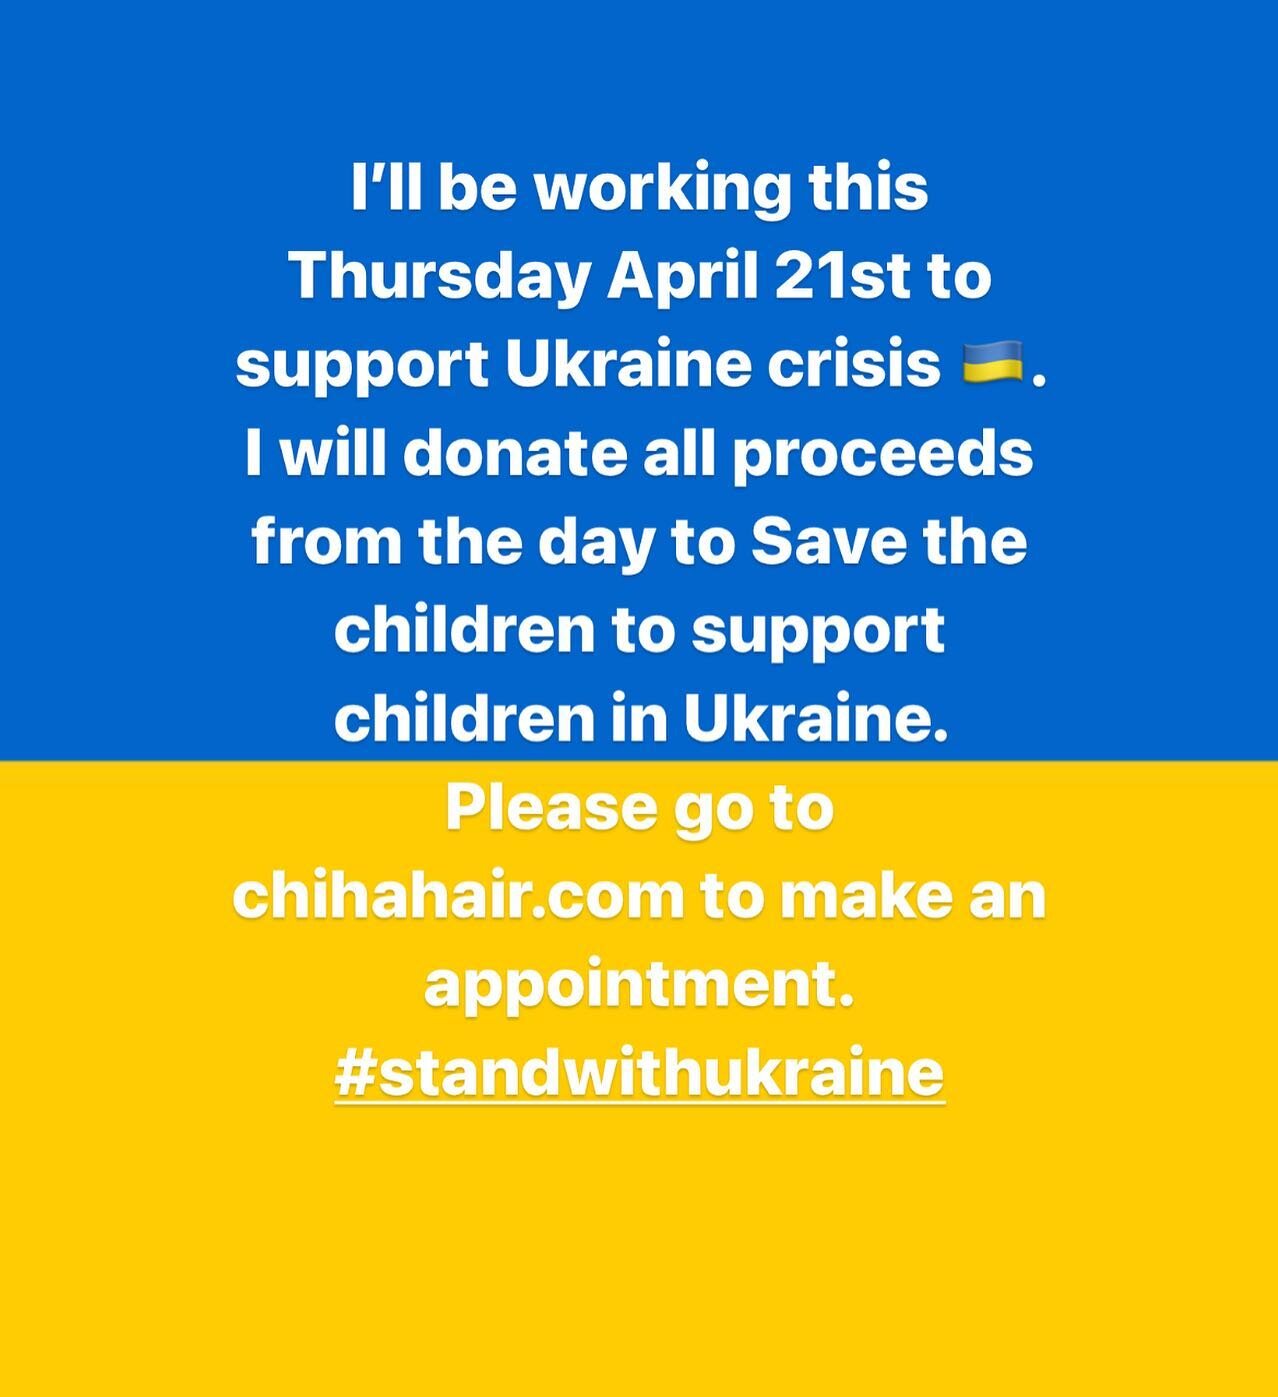 I&rsquo;ll be working this Thursday April 21st to support Ukraine crisis 🇺🇦. I will donate all proceeds from the day to Save the children to support children in Ukraine. Please go to chihahair.com to make an appointment. #standwithukraine